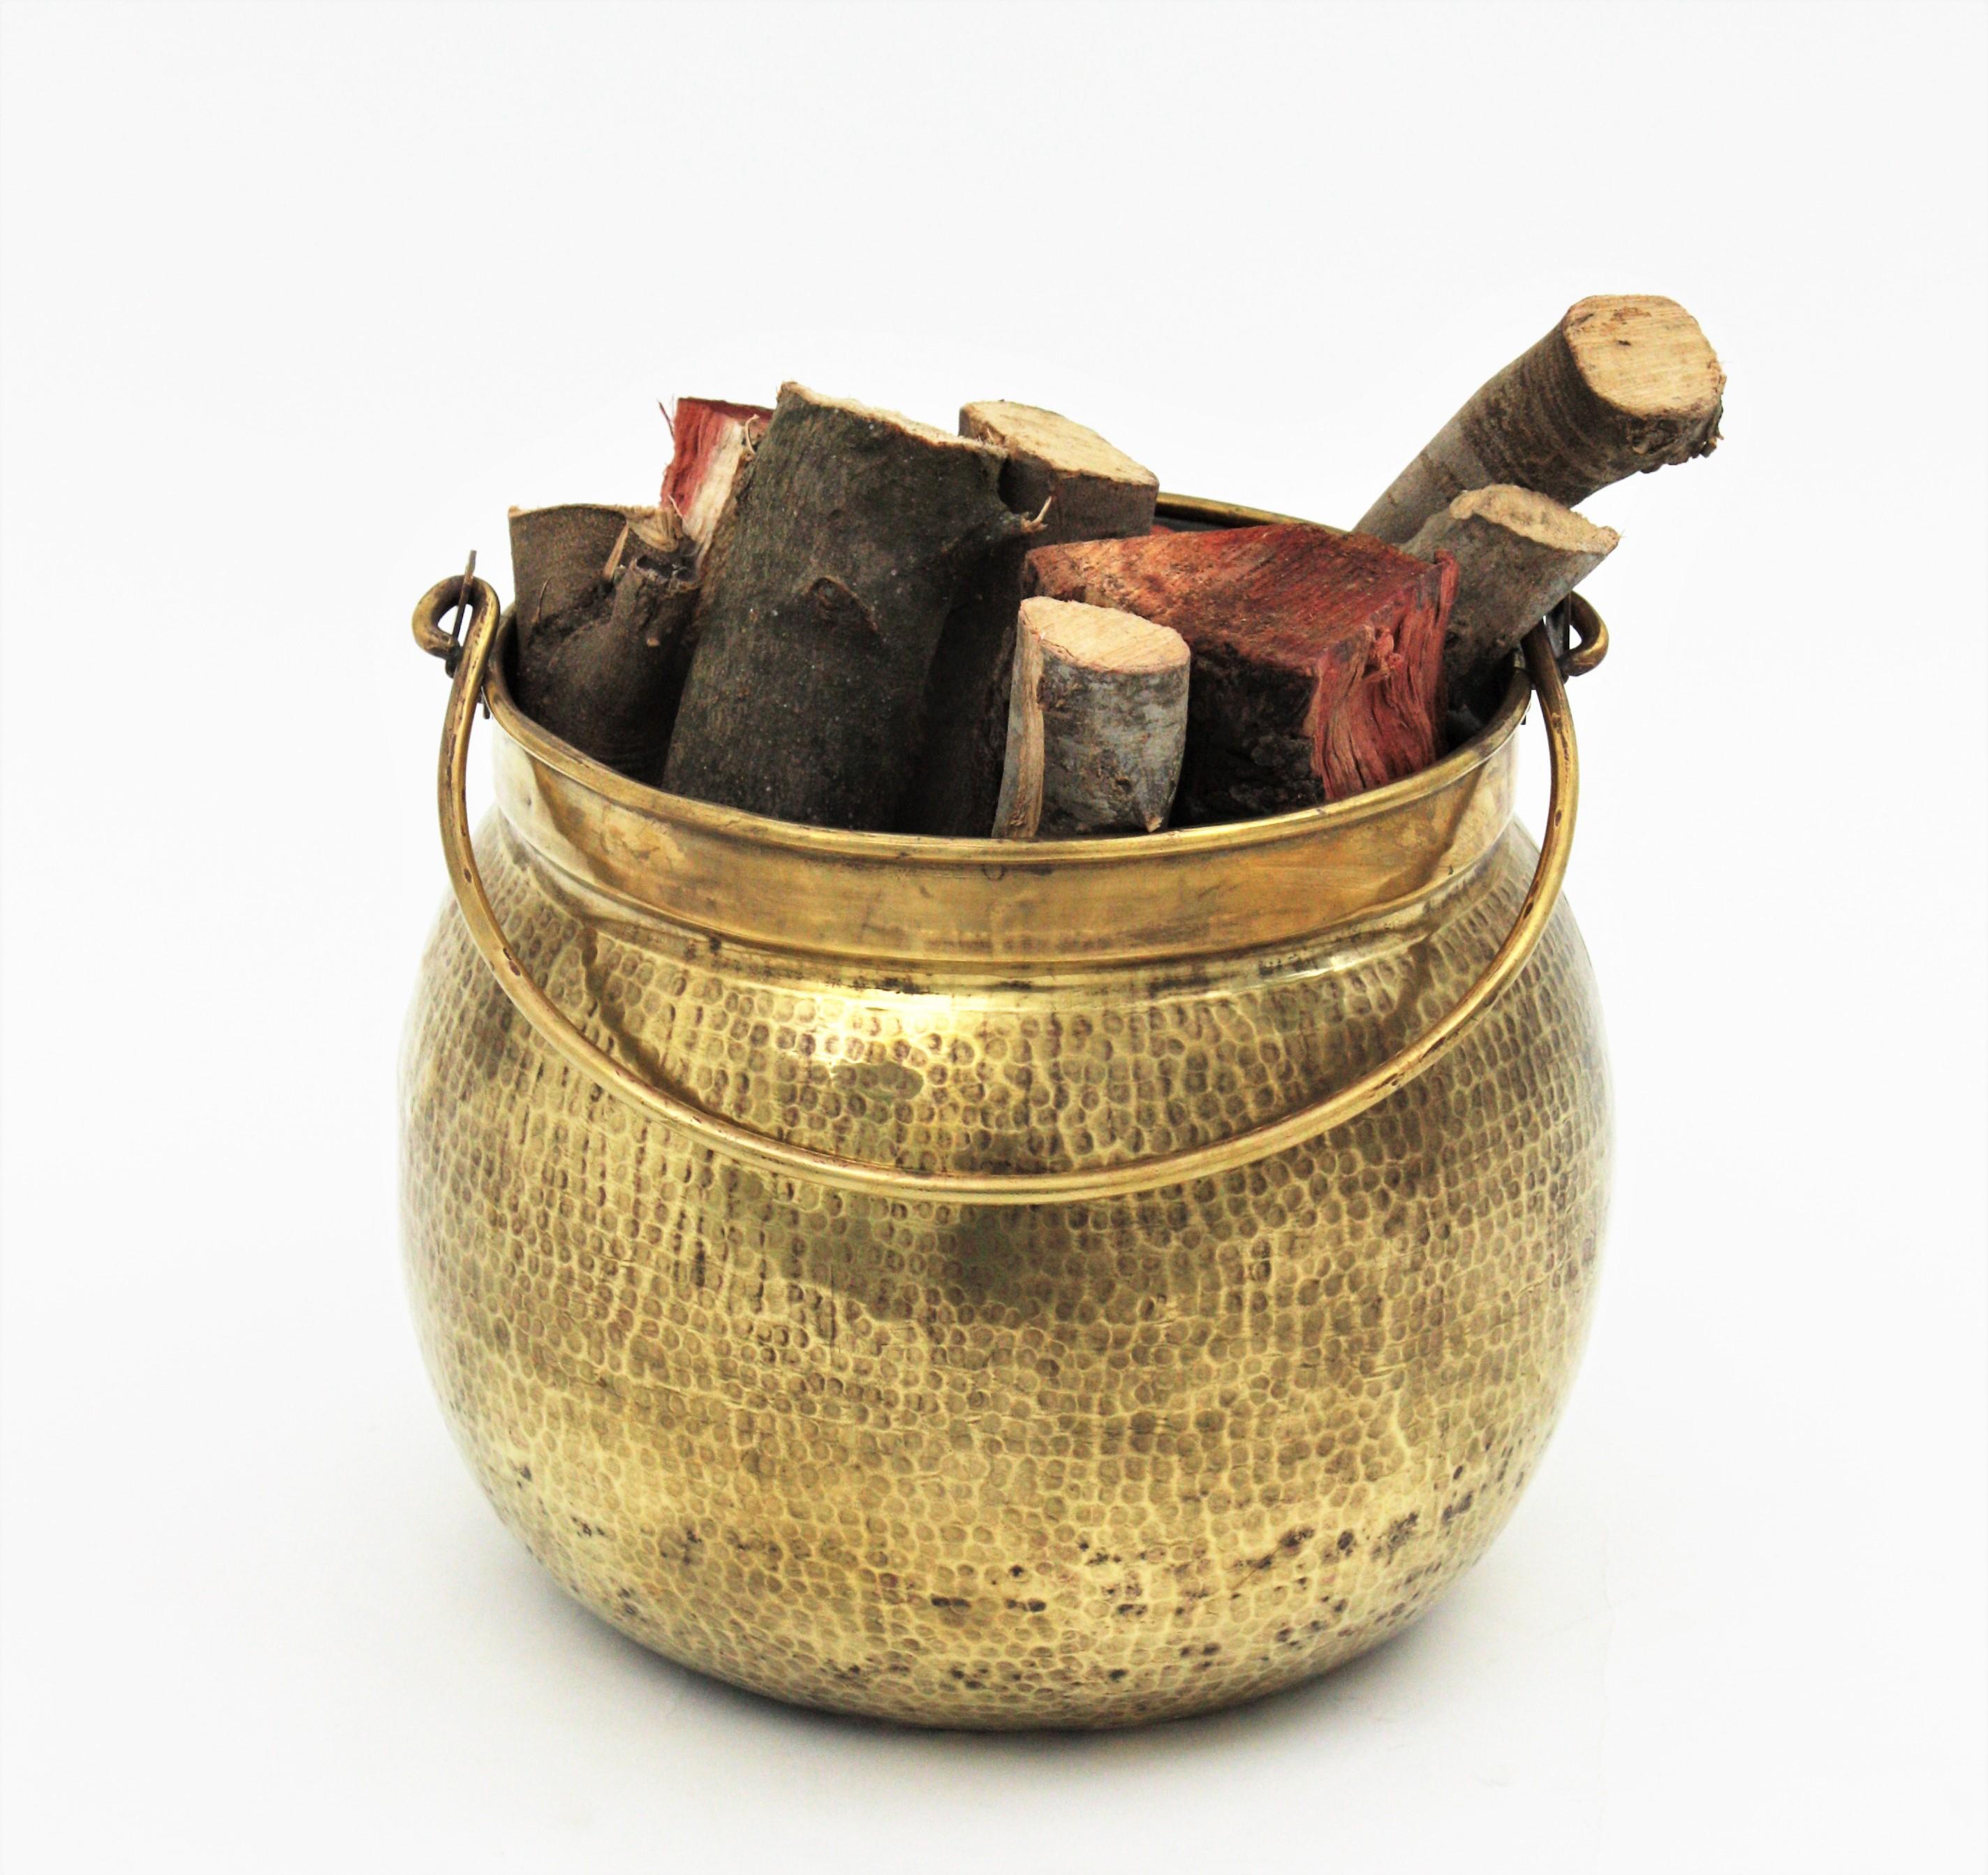 Large hand-hammered brass cauldron with brass single handle. France, 1930s.
This handcrafted brass cauldron has a gorgeous aged patina. The brass is heavily marked by hammer work.
Its large size allows to be used as log holder, decorative storage